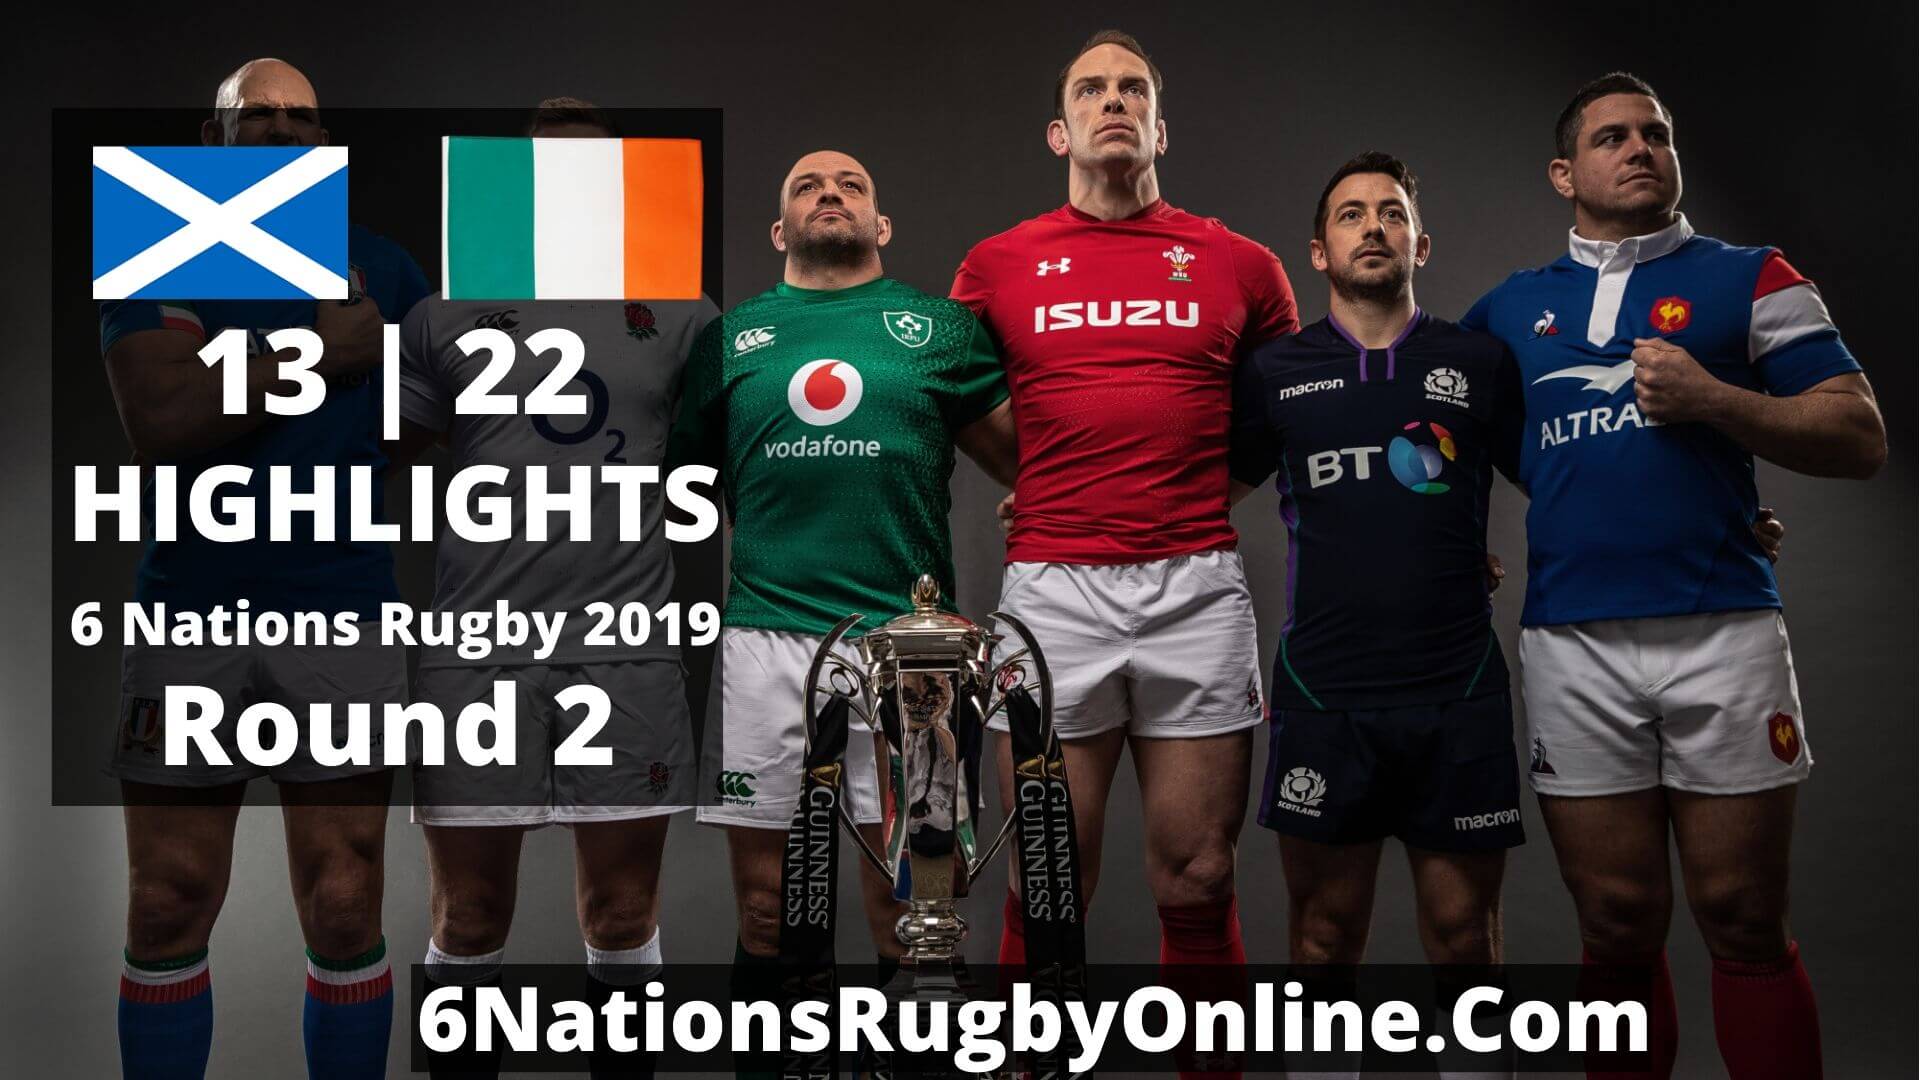 Scotland Vs Ireland Highlights 2019 Six Nations Rugby Round 2